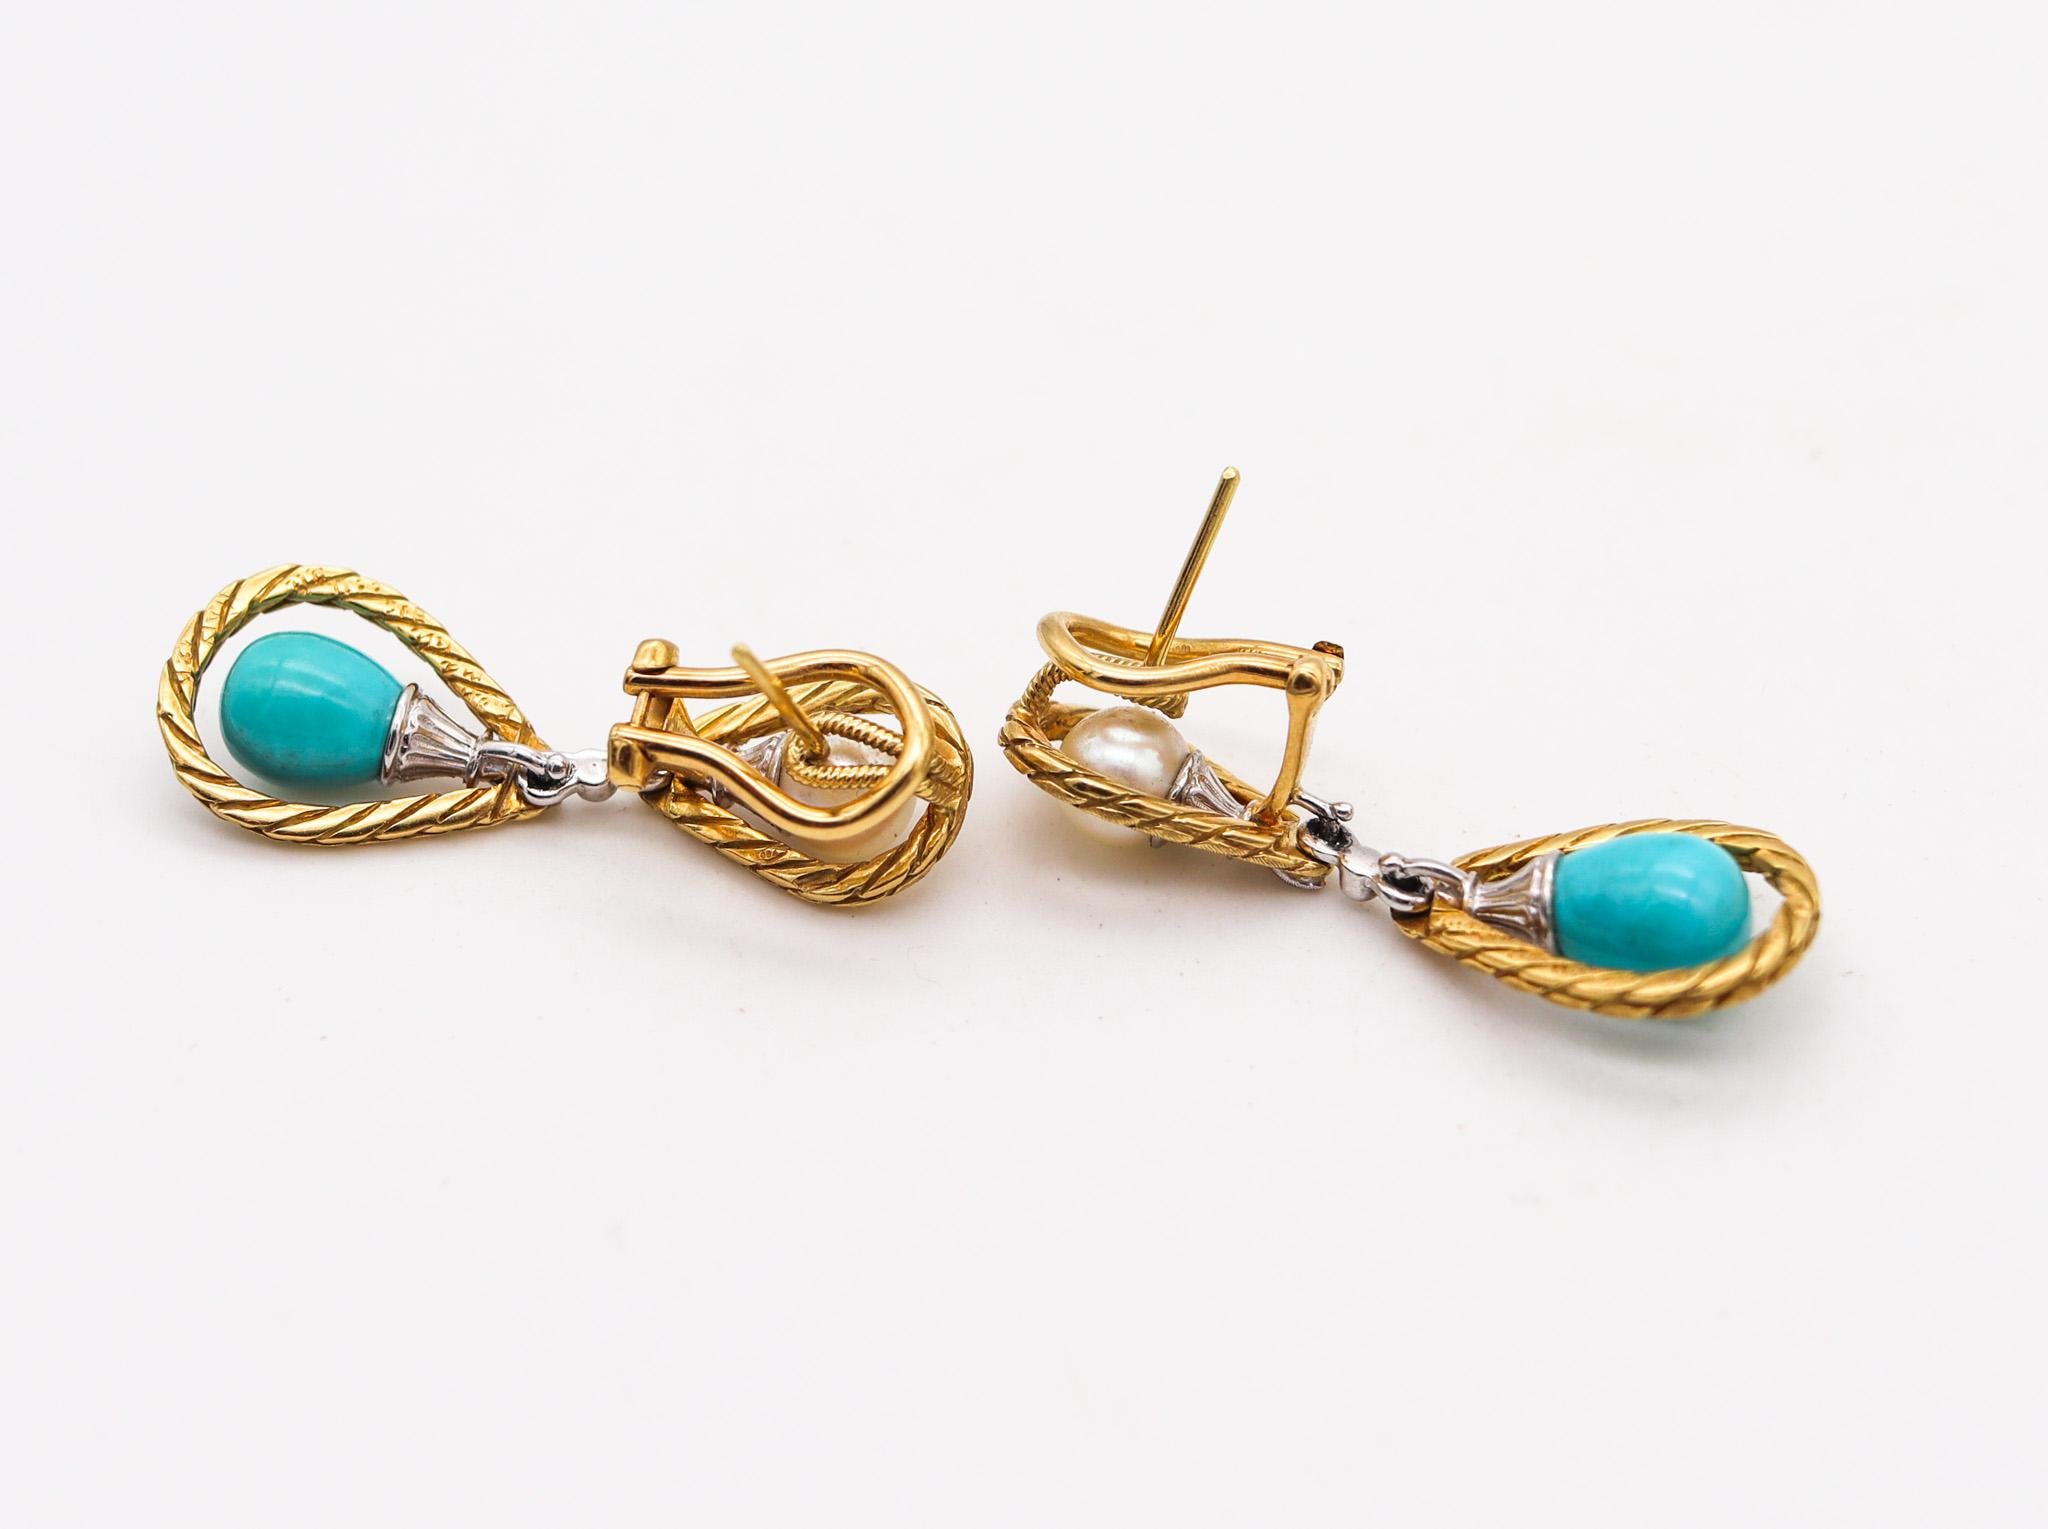 Mario Buccellati 1970 Dangle Earrings In 18Kt Gold With Turquoises and Pearls In Excellent Condition For Sale In Miami, FL